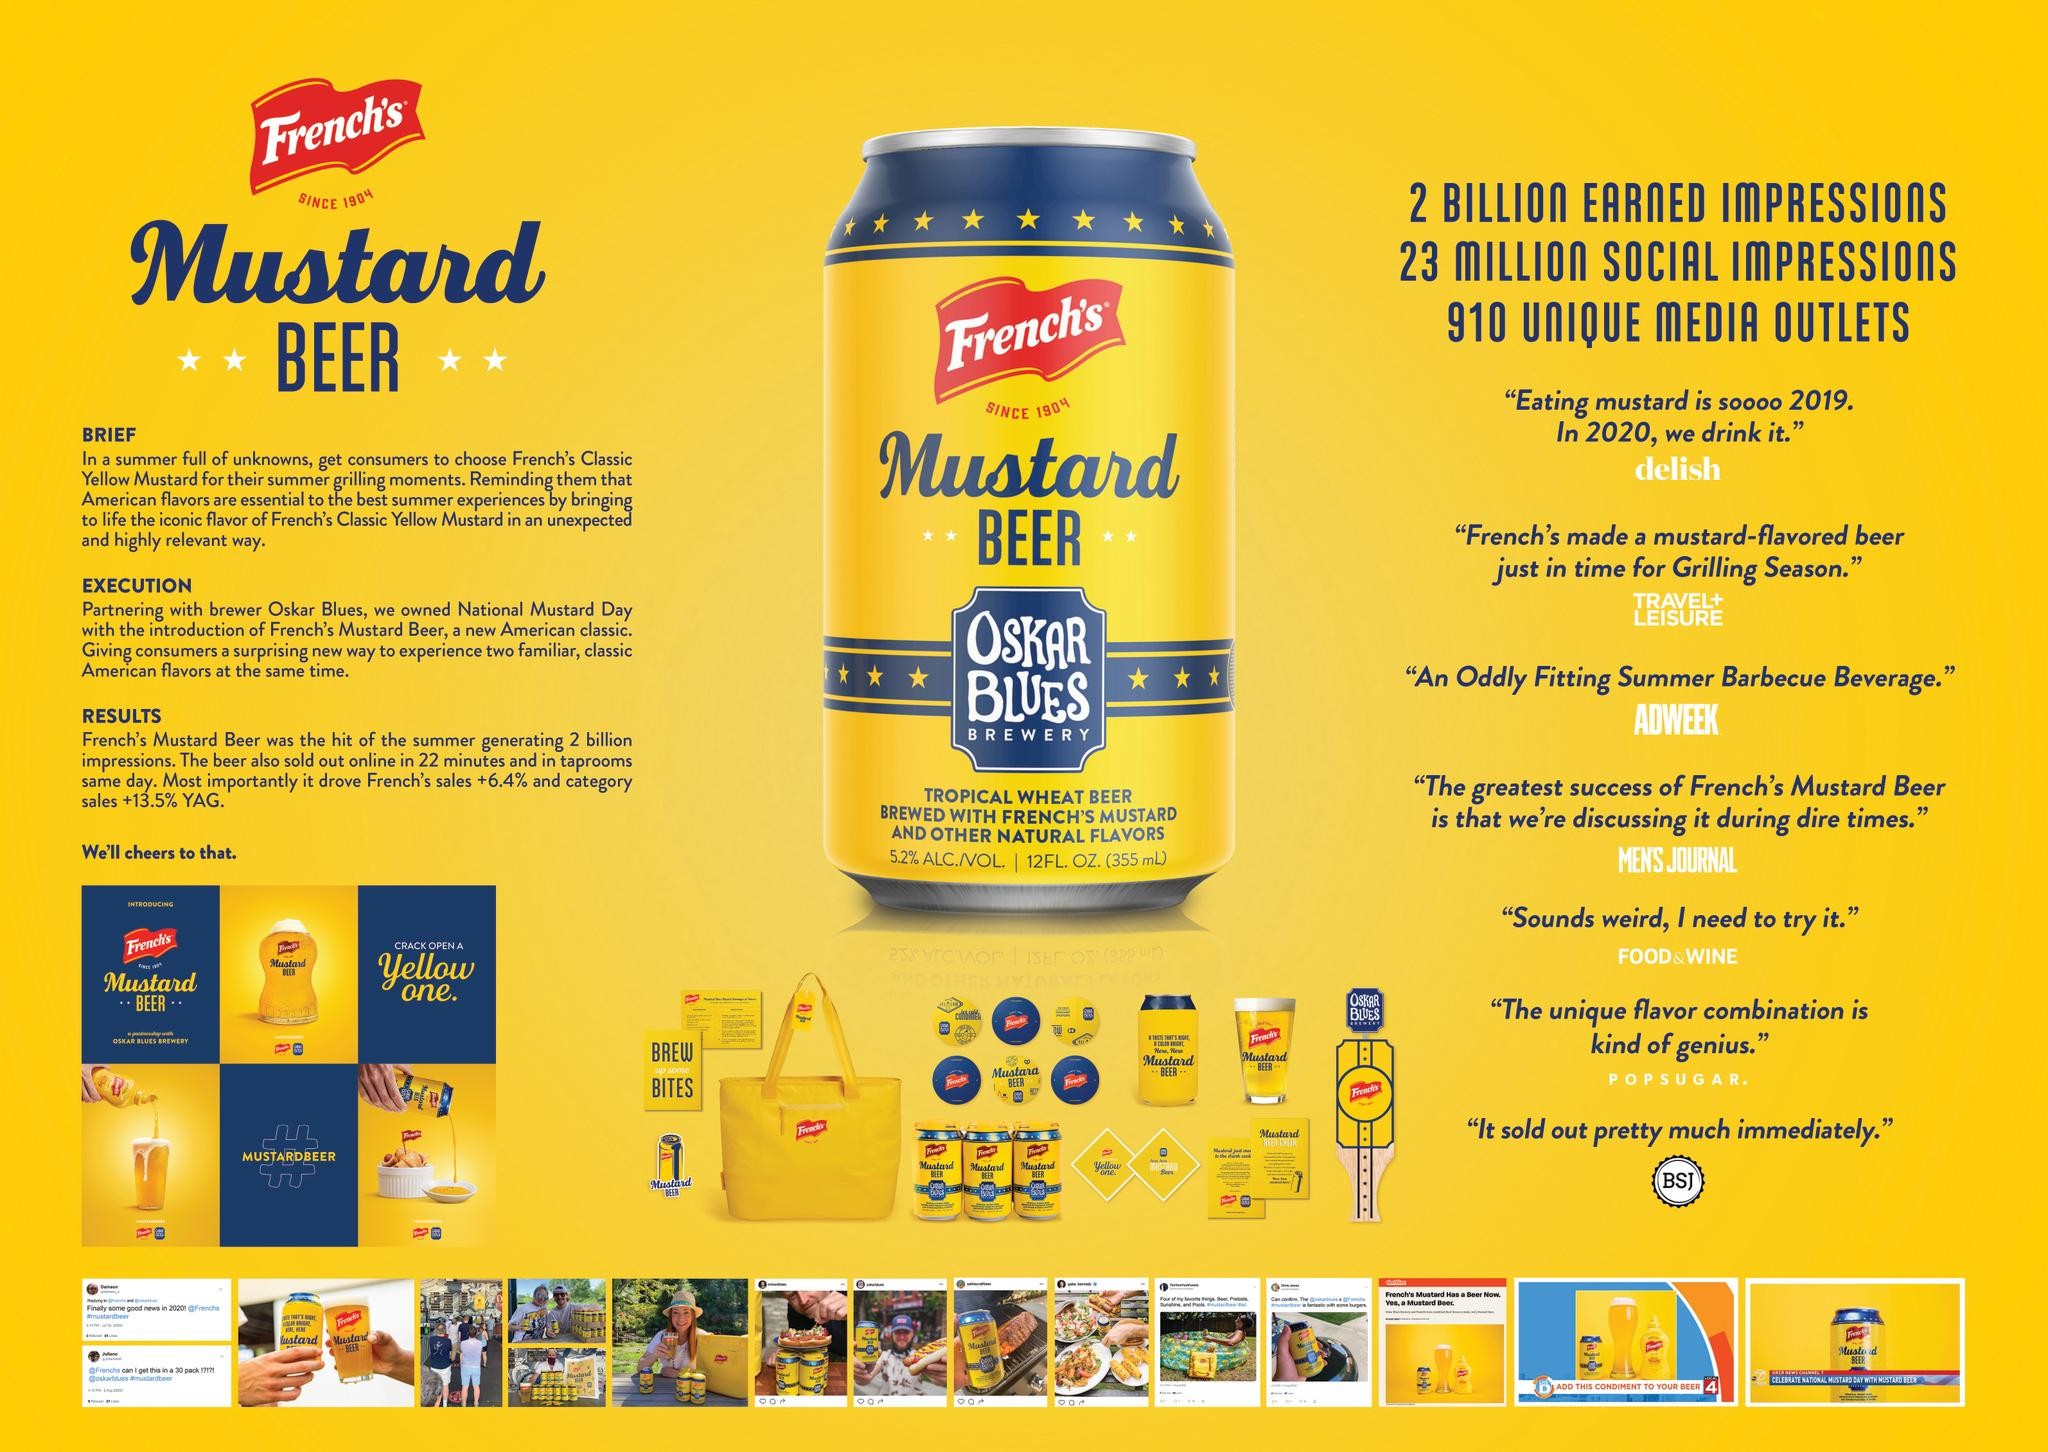 French's Mustard Beer